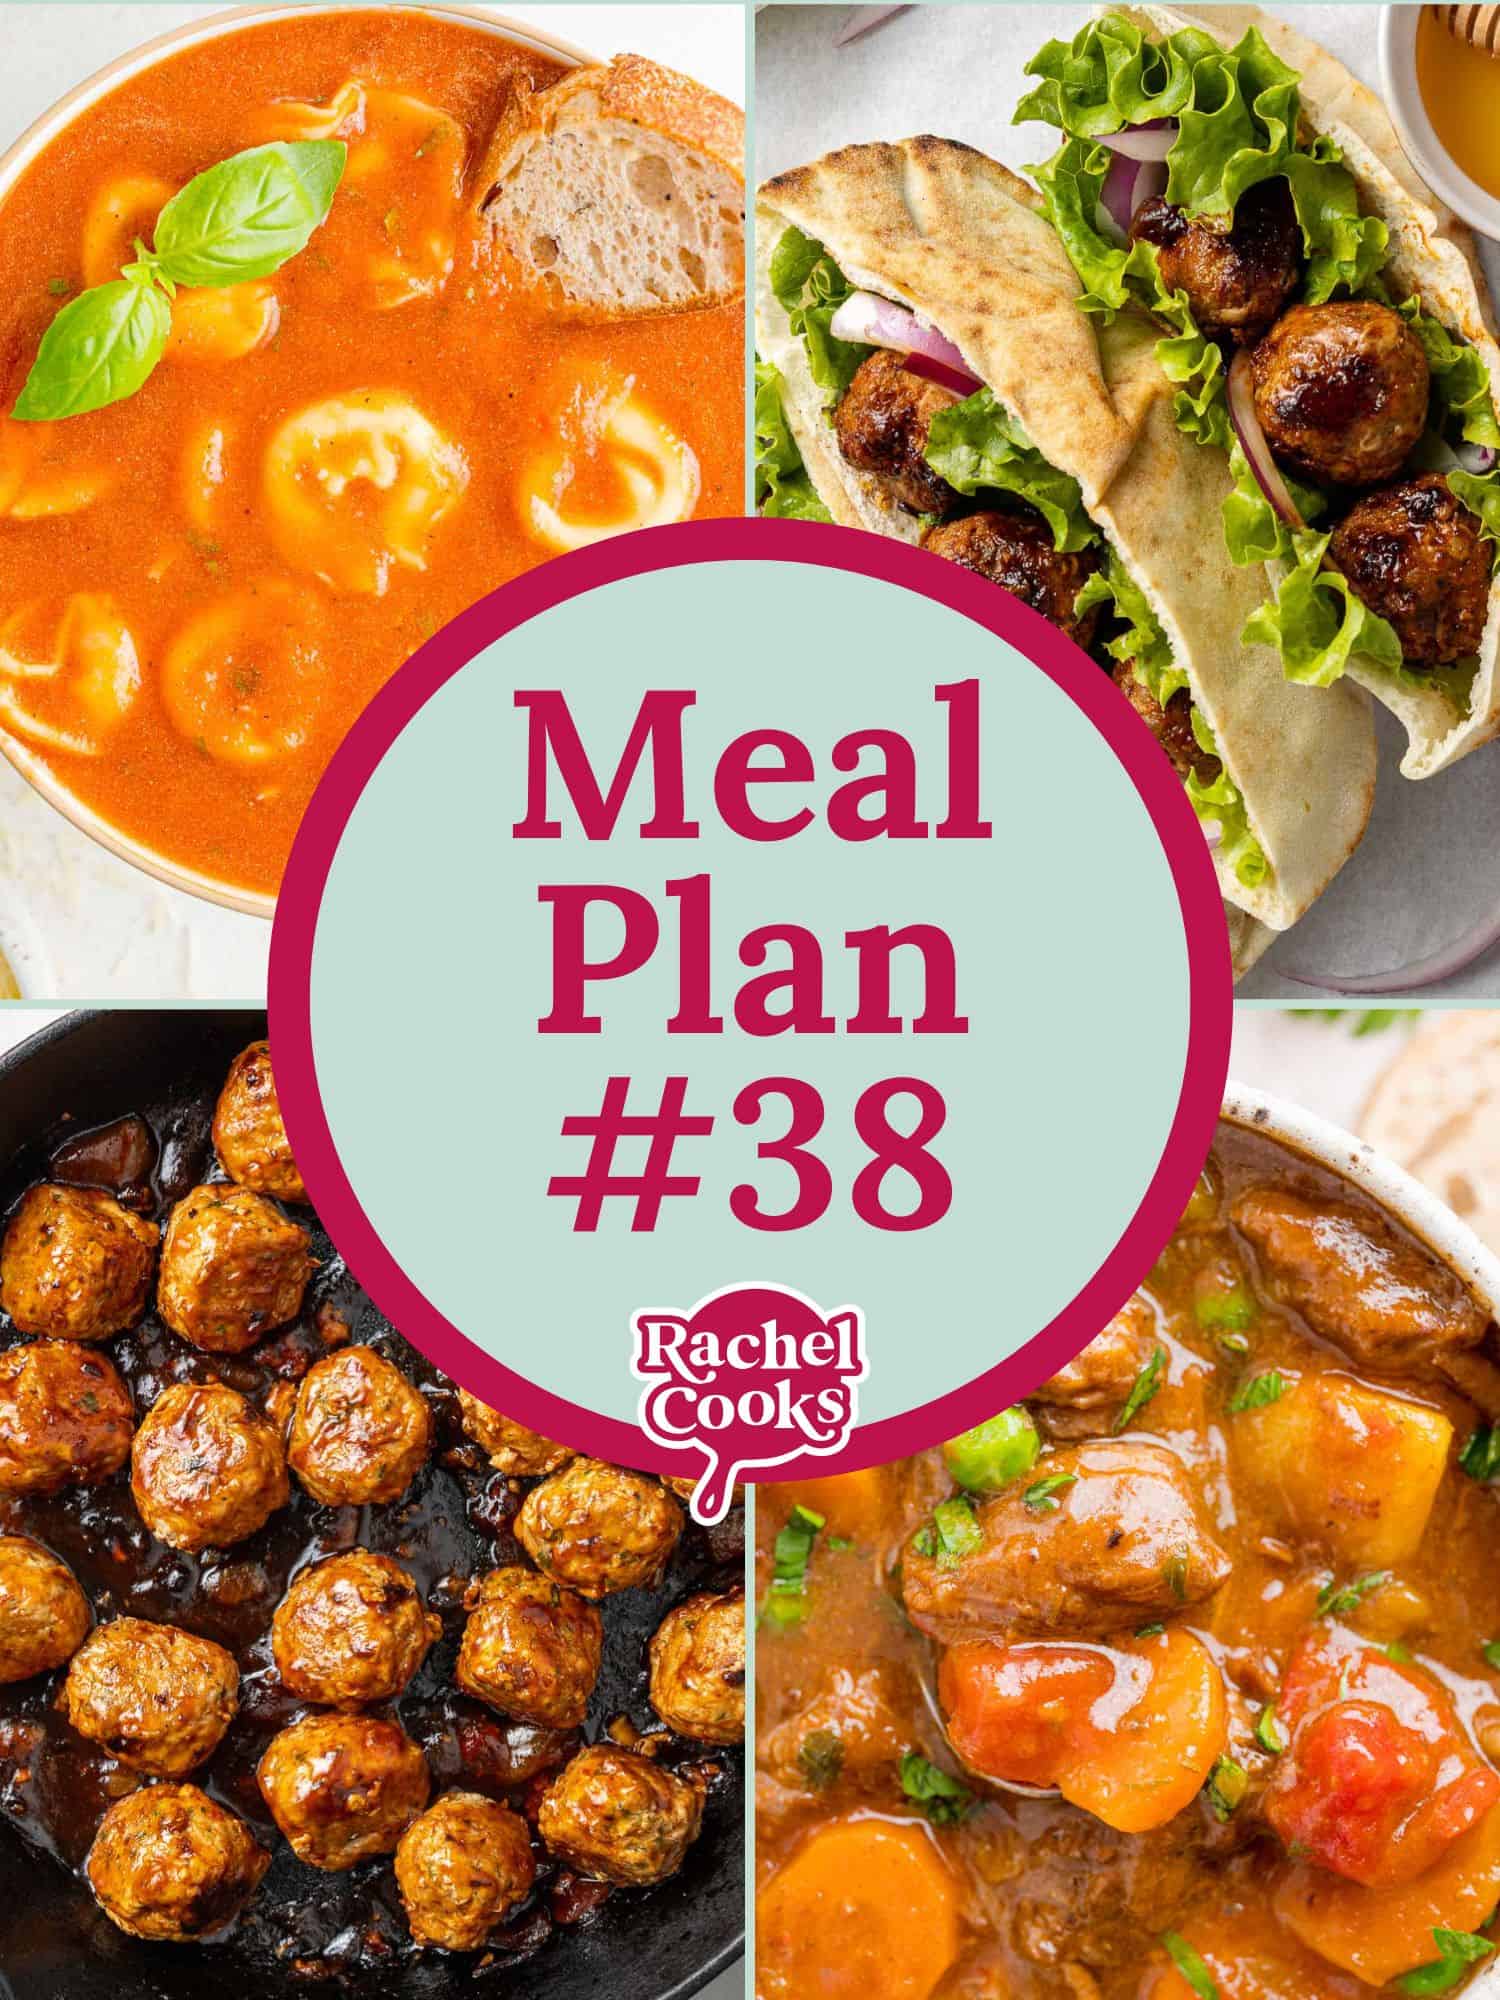 Meal plan graphic with text and photos.